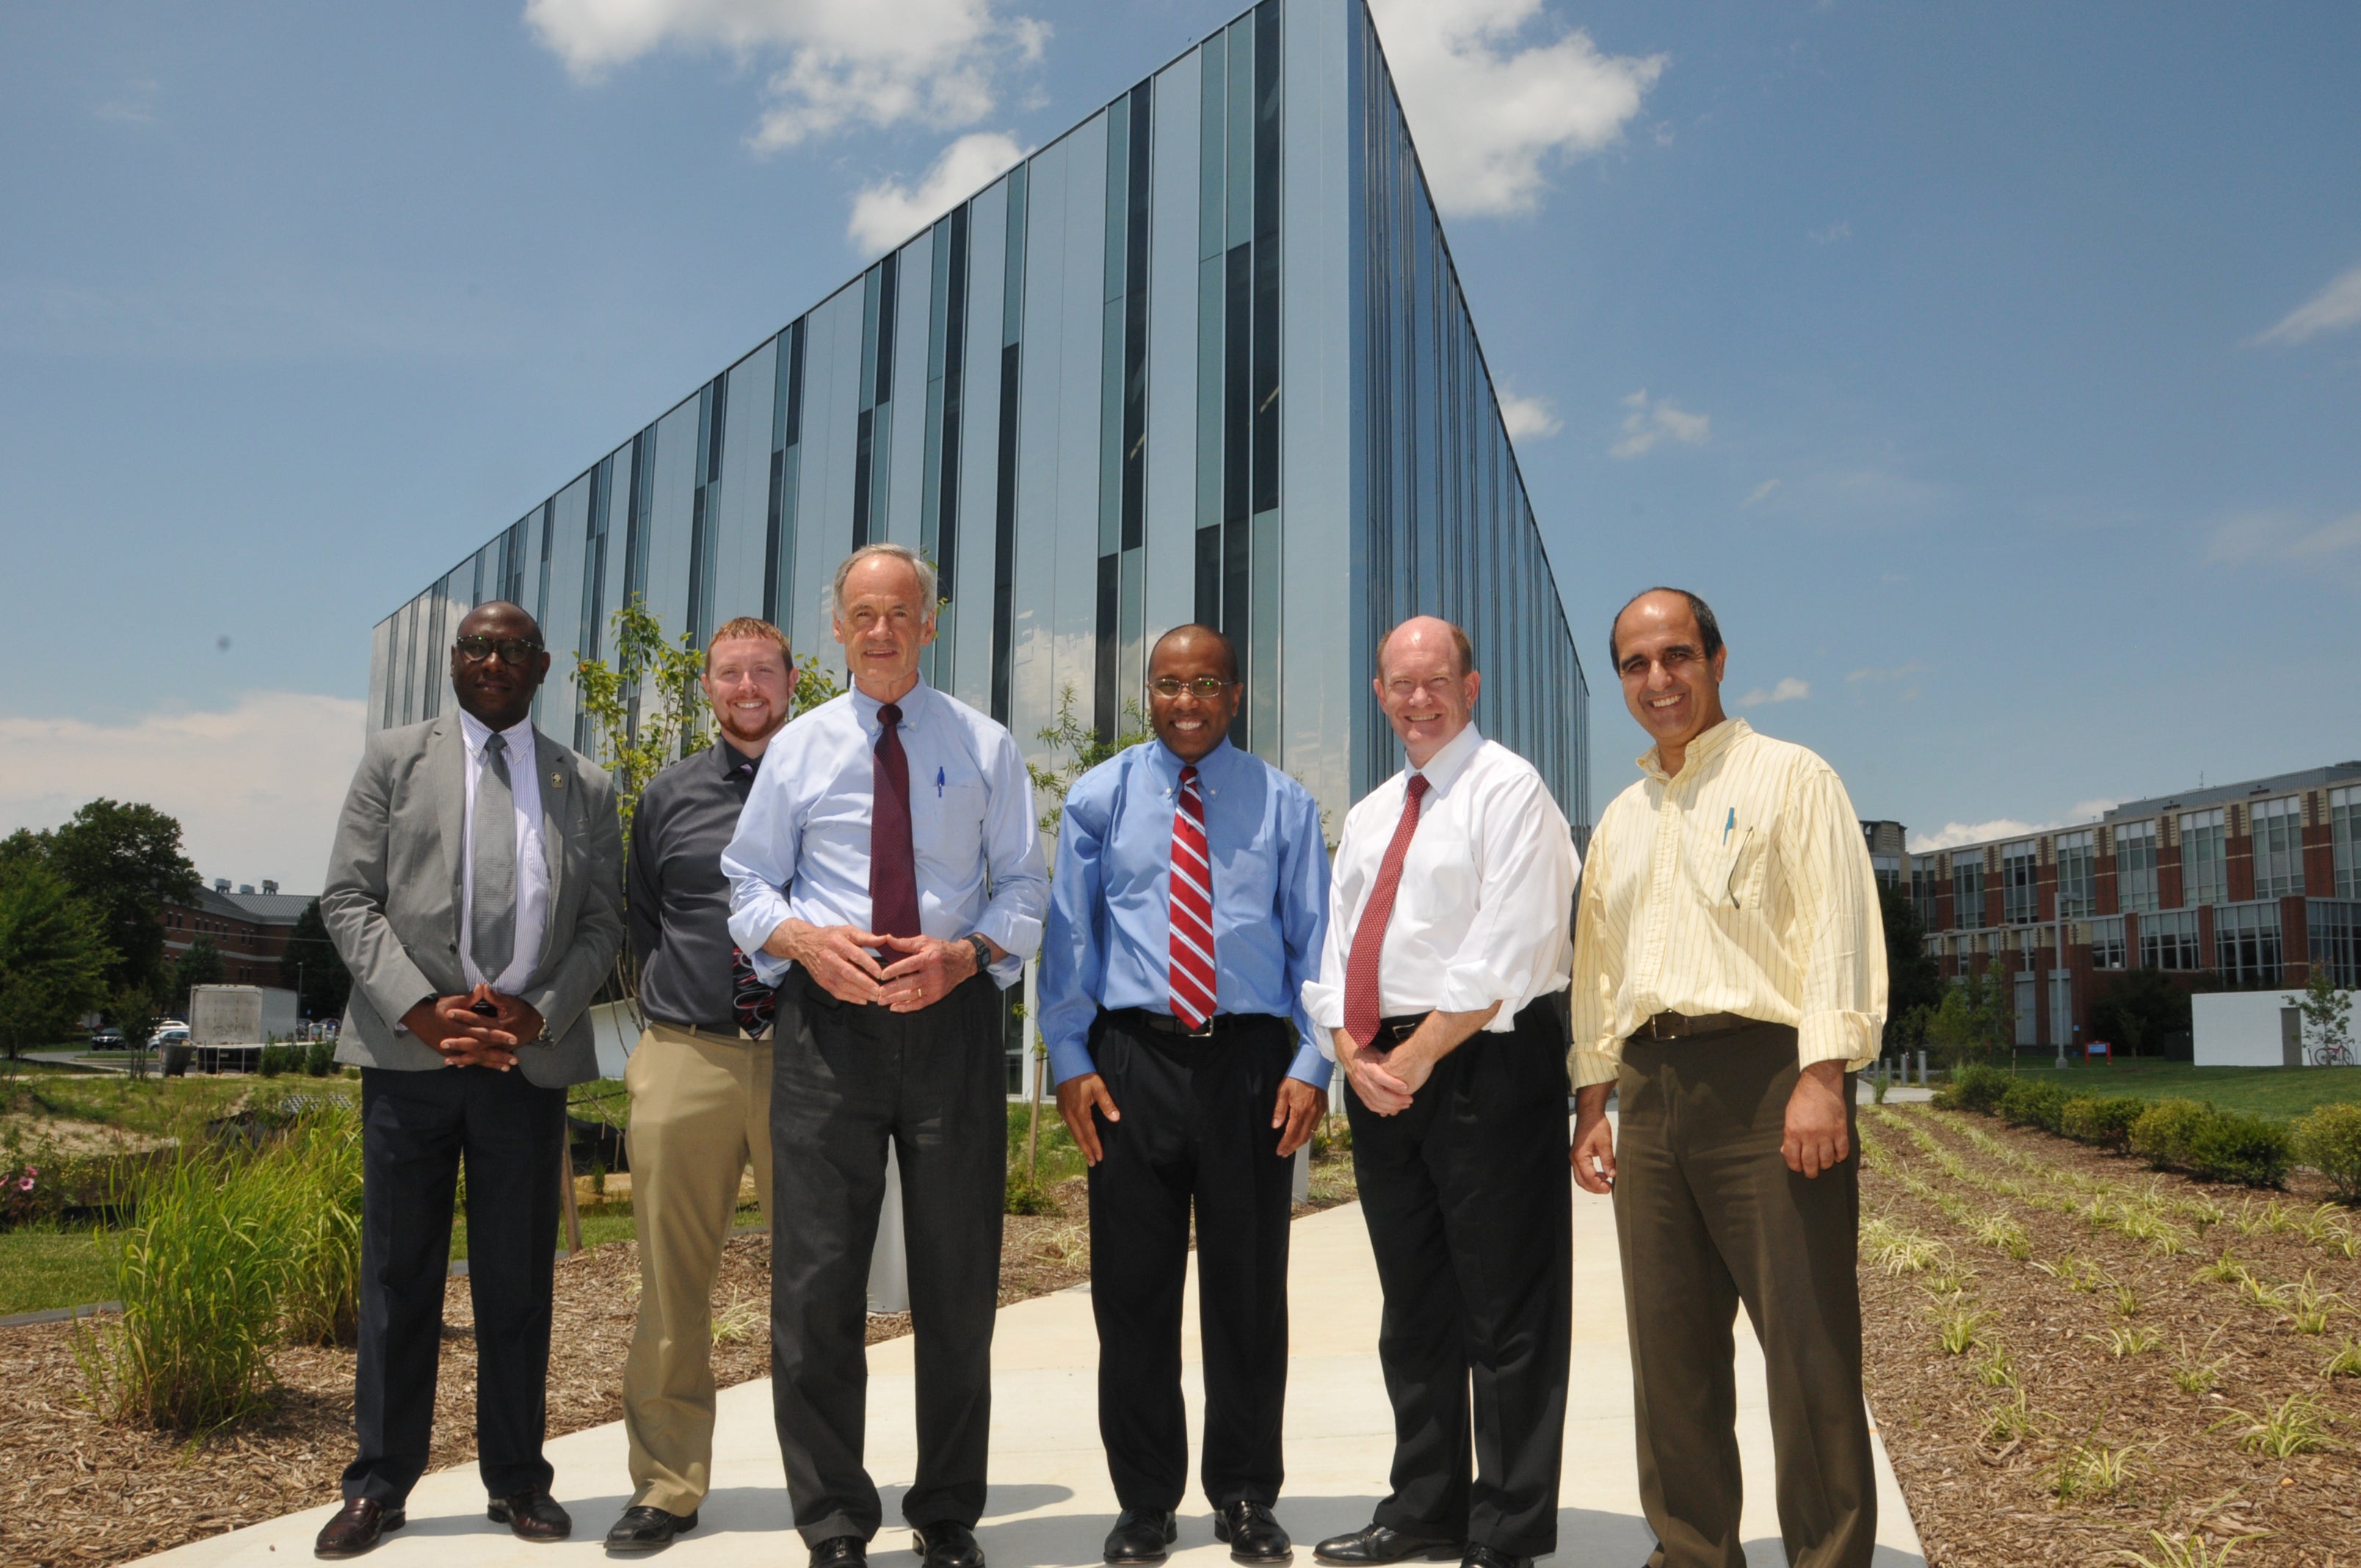  Senators Tom Carper (third from left) and Chris Coons (second from right) pose with Delaware State president Harry Williams (center) outside the university's new optics facility. (Photo courtesy of Delaware State University) 